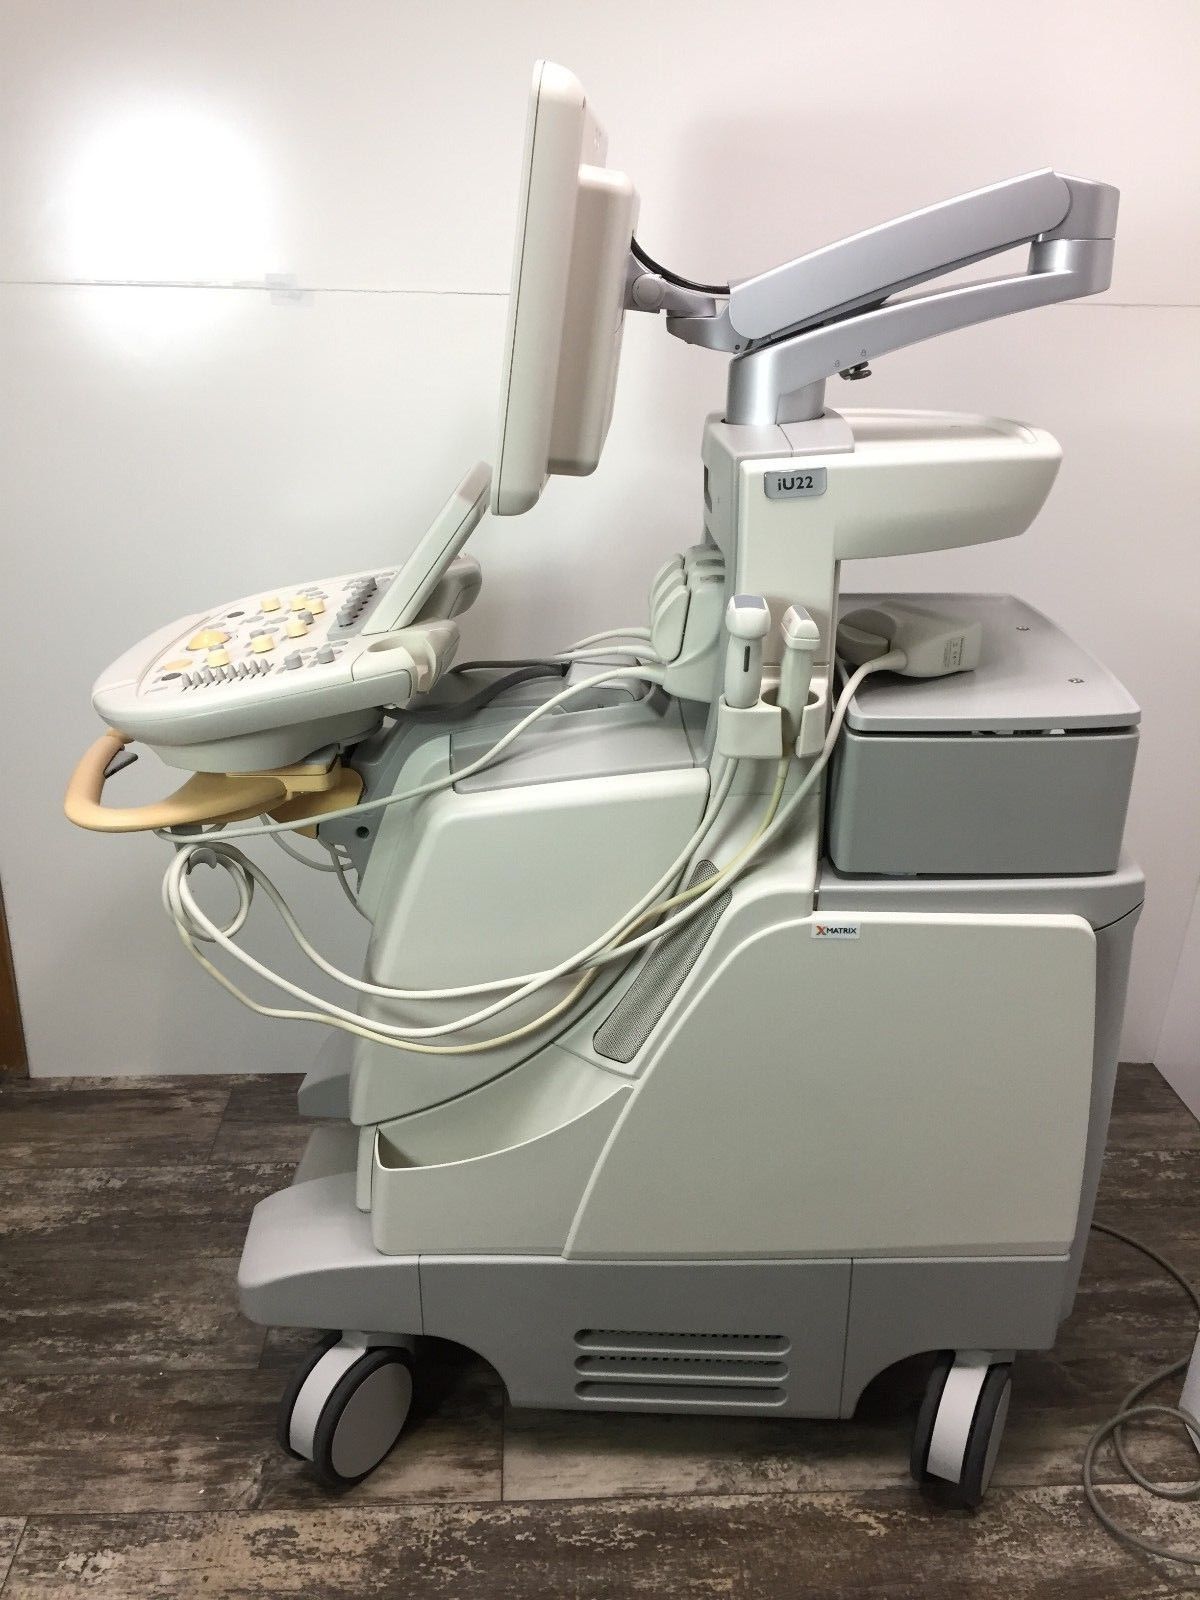 a medical device is sitting on a wooden floor